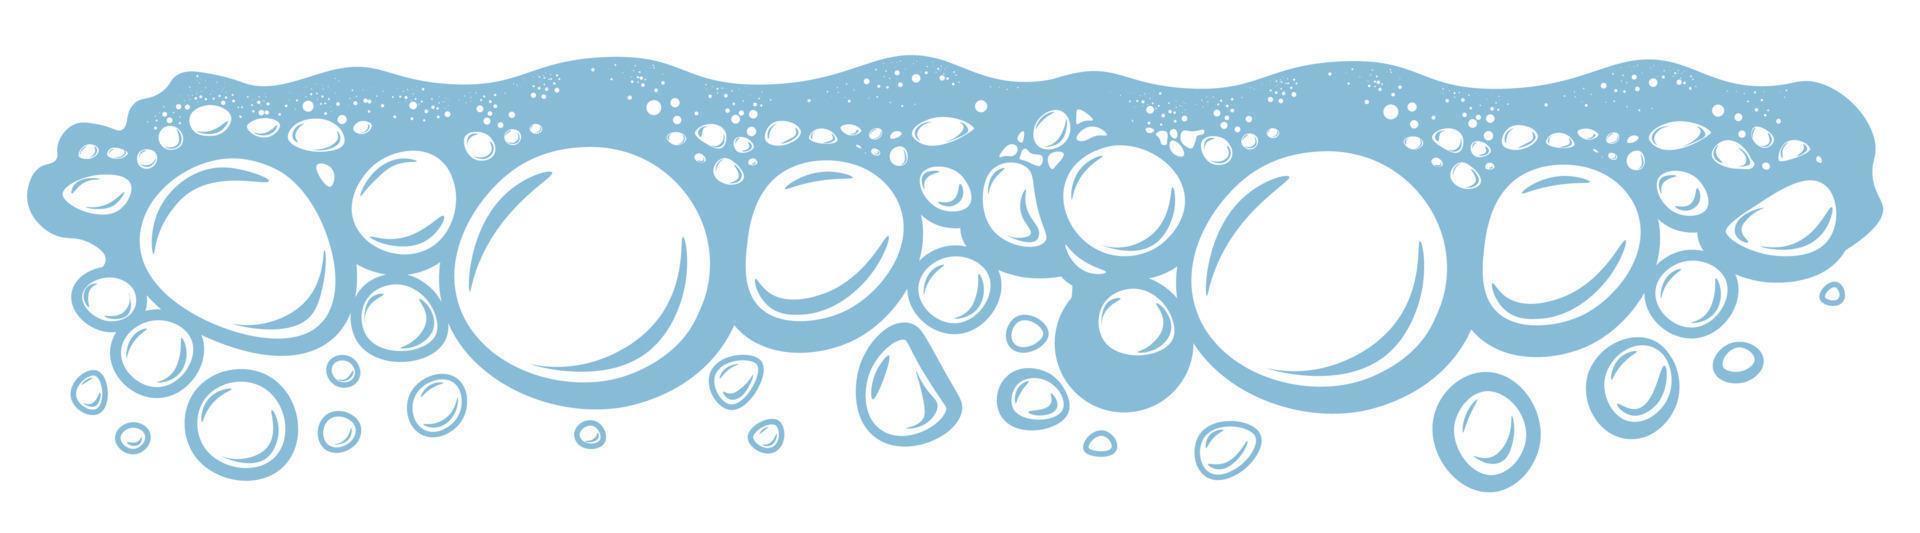 Bubbly water in line, hygiene or laundry soap suds vector